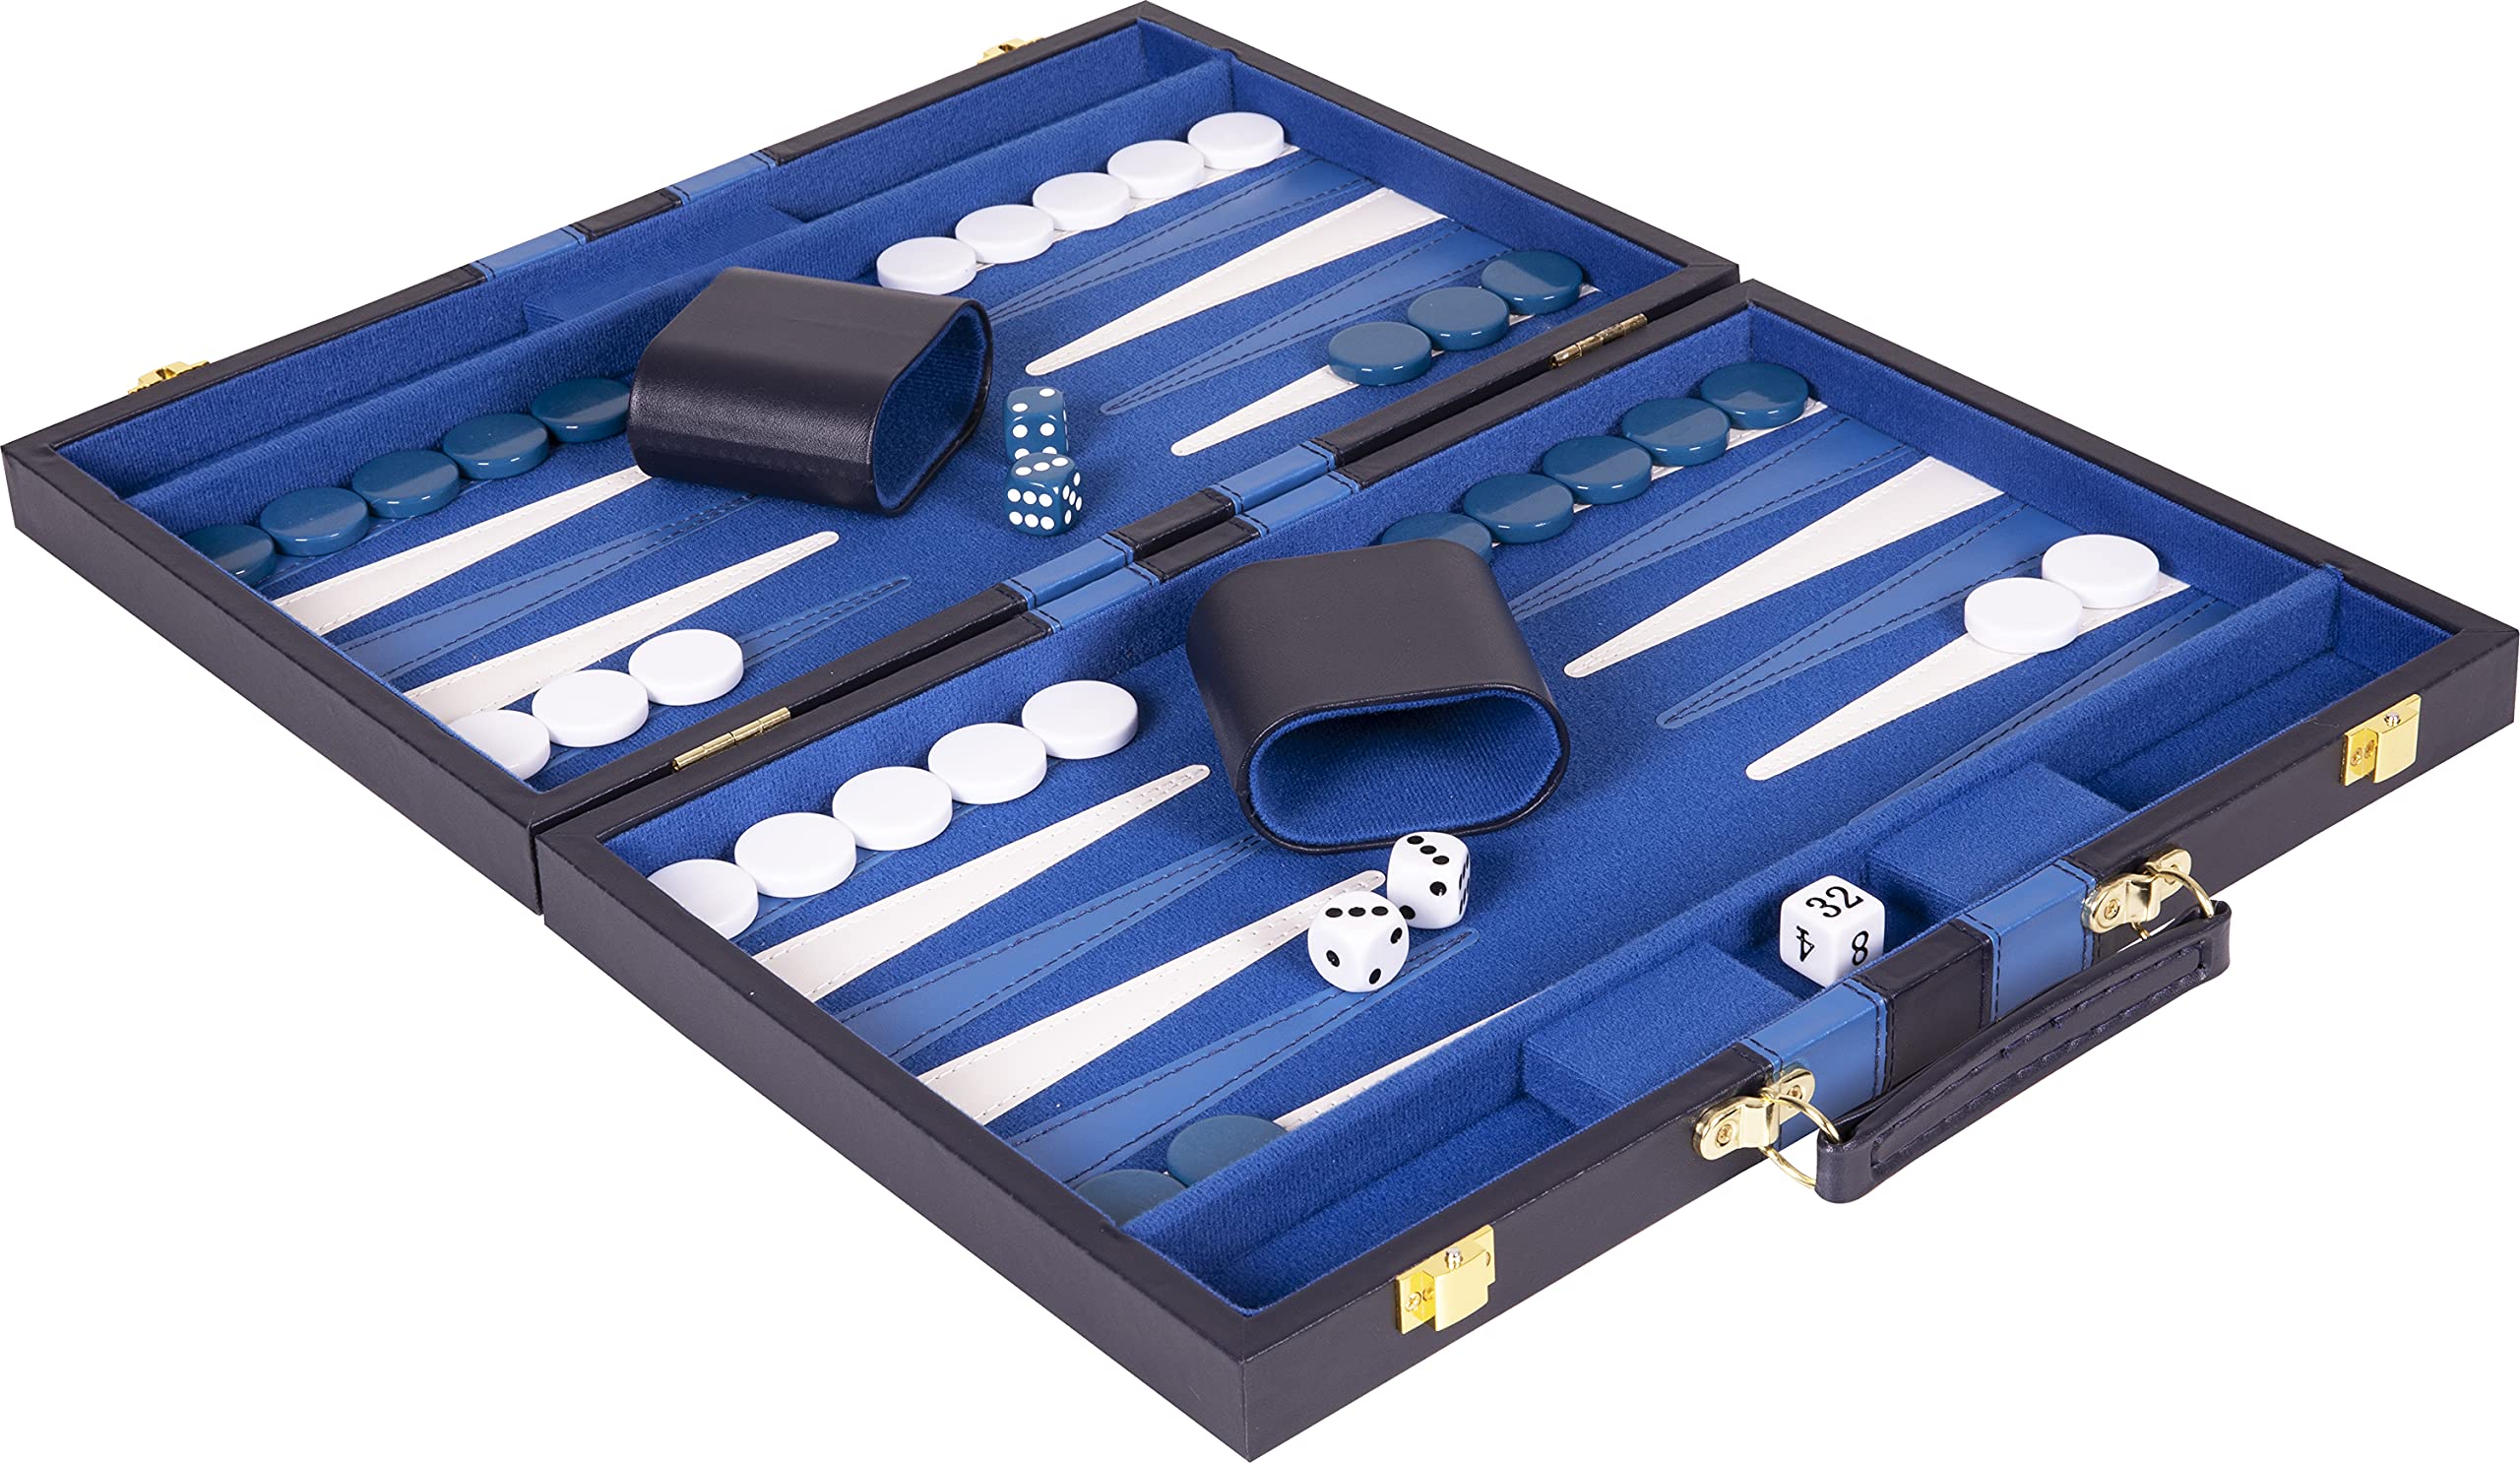 Crazy Games Backgammon Set - Classic Small Blue 11 Inch Backgammon Sets for Adults Board Game with Premium Leather Case - Best Strategy & Tip Guide (Blue, Small)